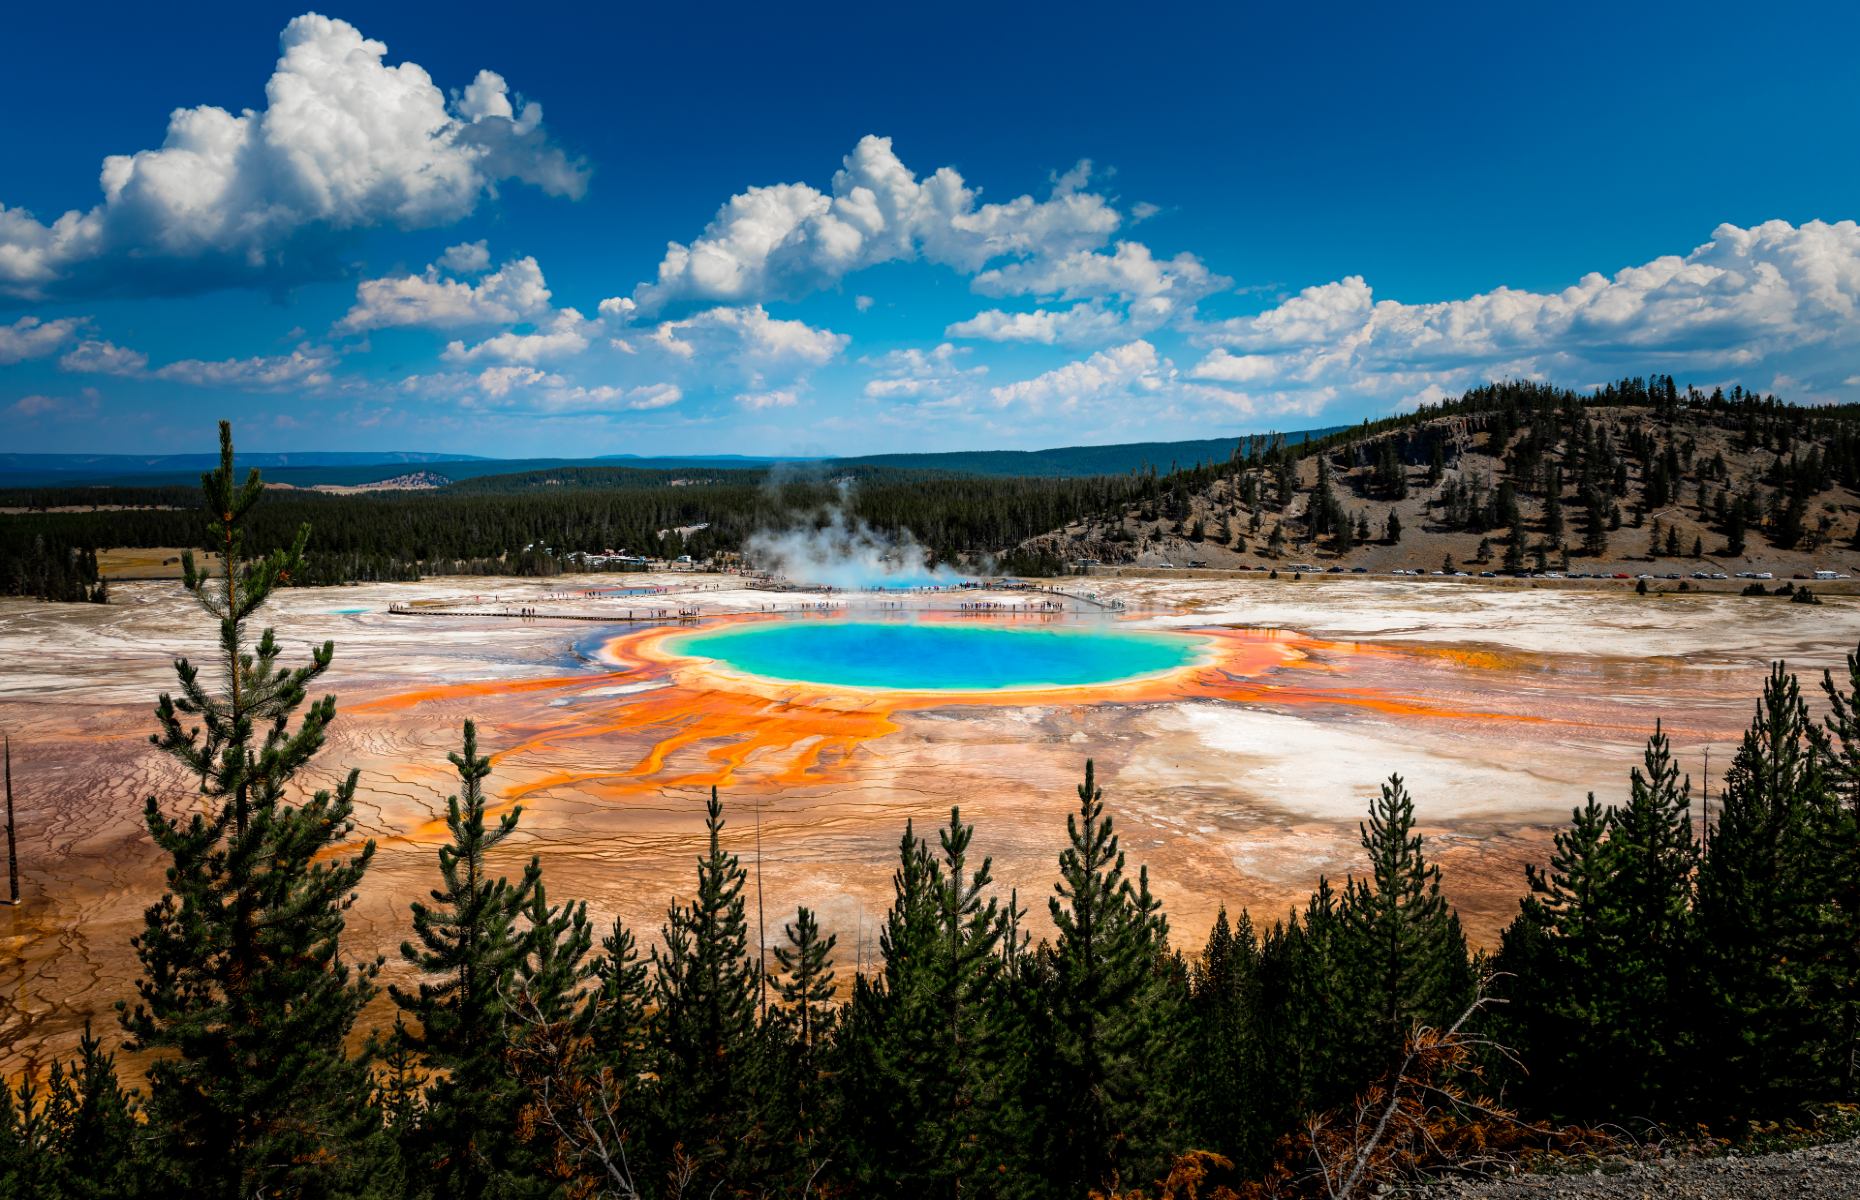 Grand Prismatic Spring in Yellowstone National Park (Image: Anders Riishede/Shutterstock)